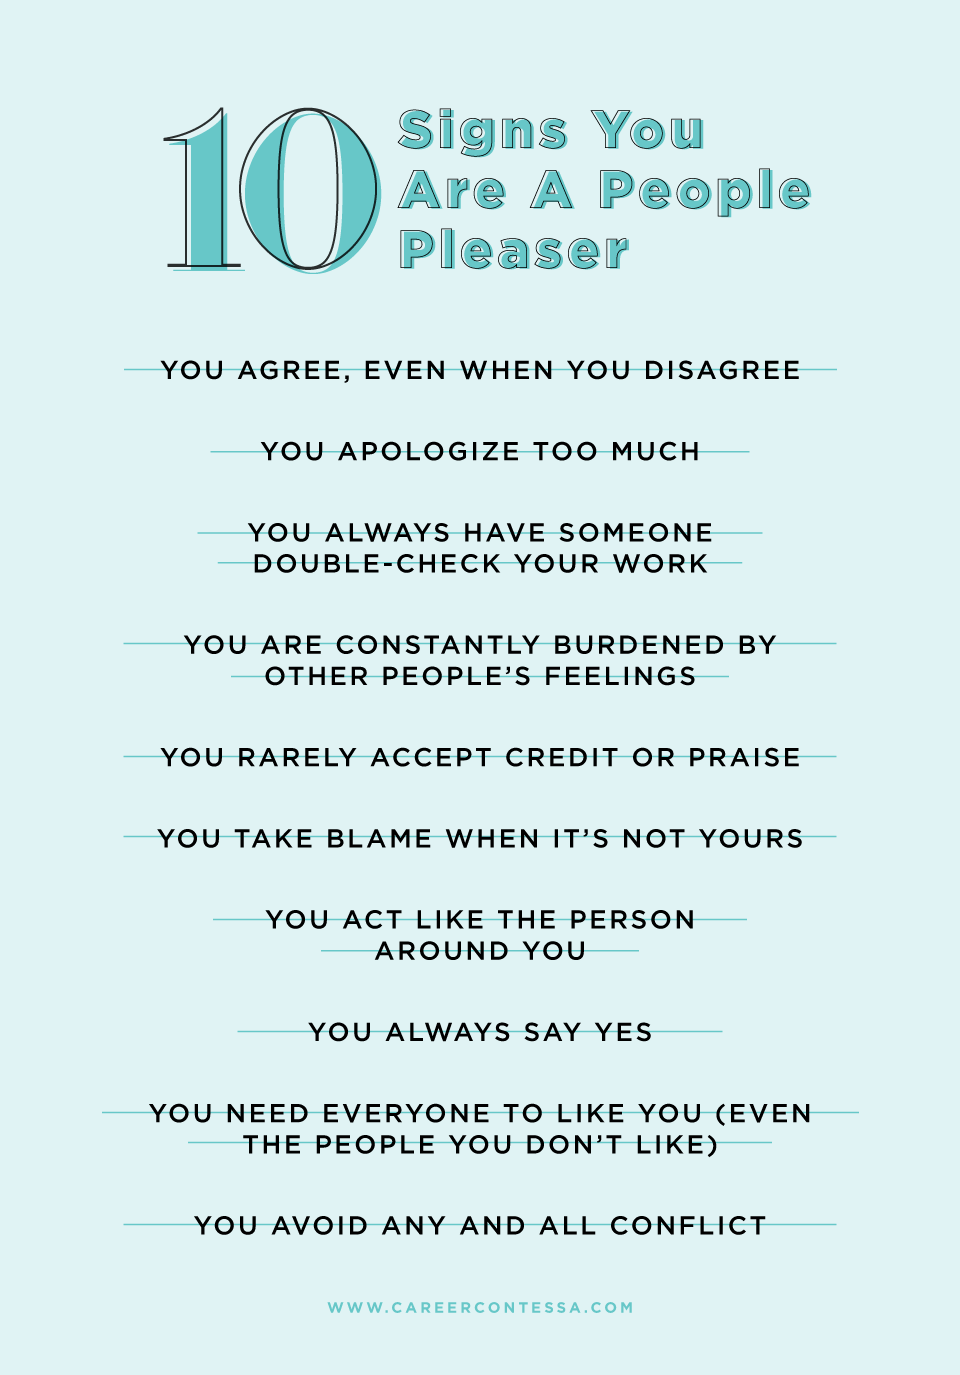 10 Signs You Are A People Pleaser List